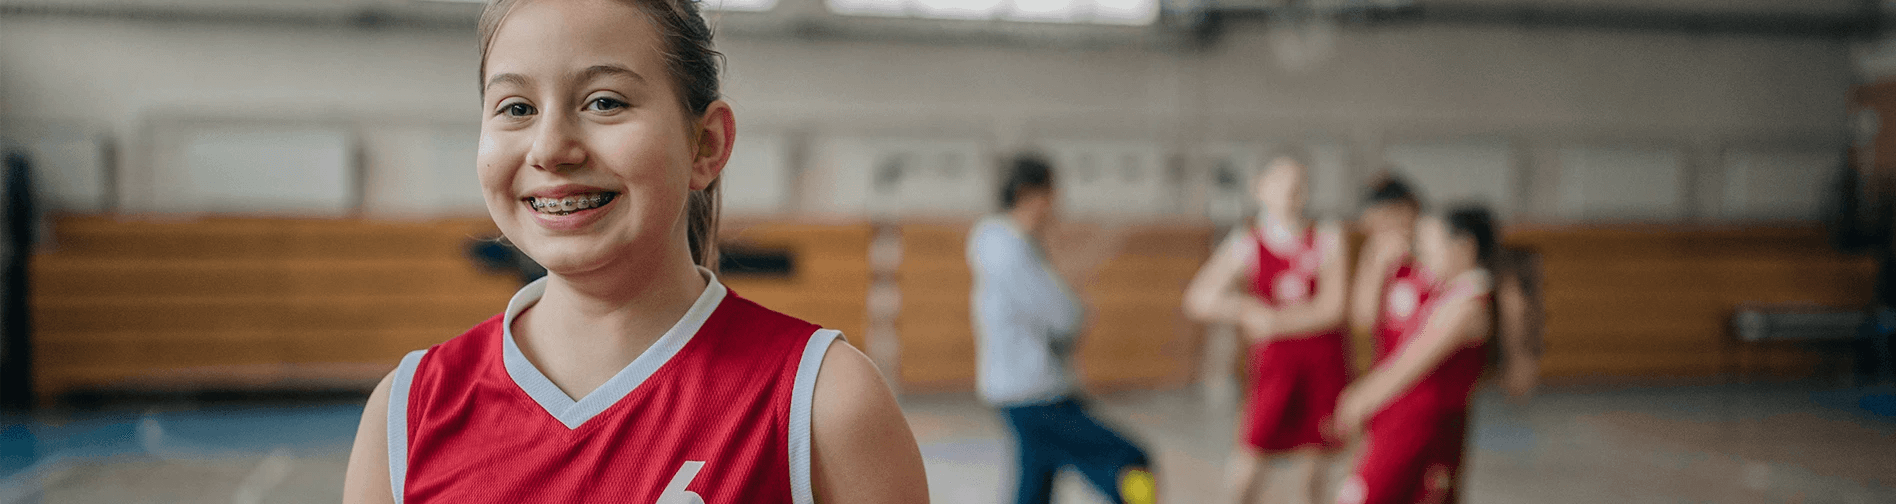 young girl with braces smiling on basketball court